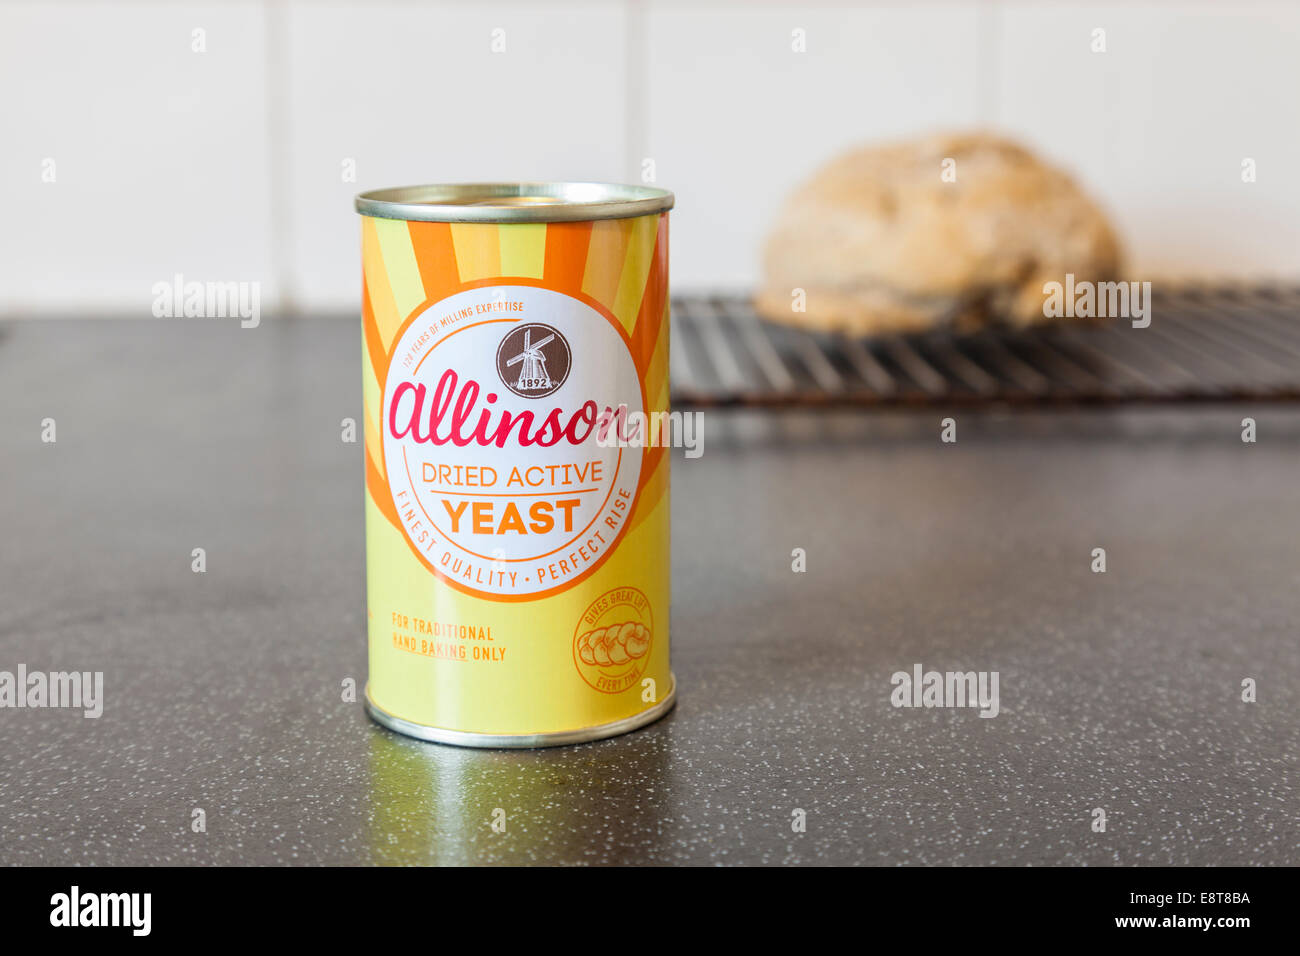 Can of Allinson Dried Active Yeast on a kitchen surface Stock Photo